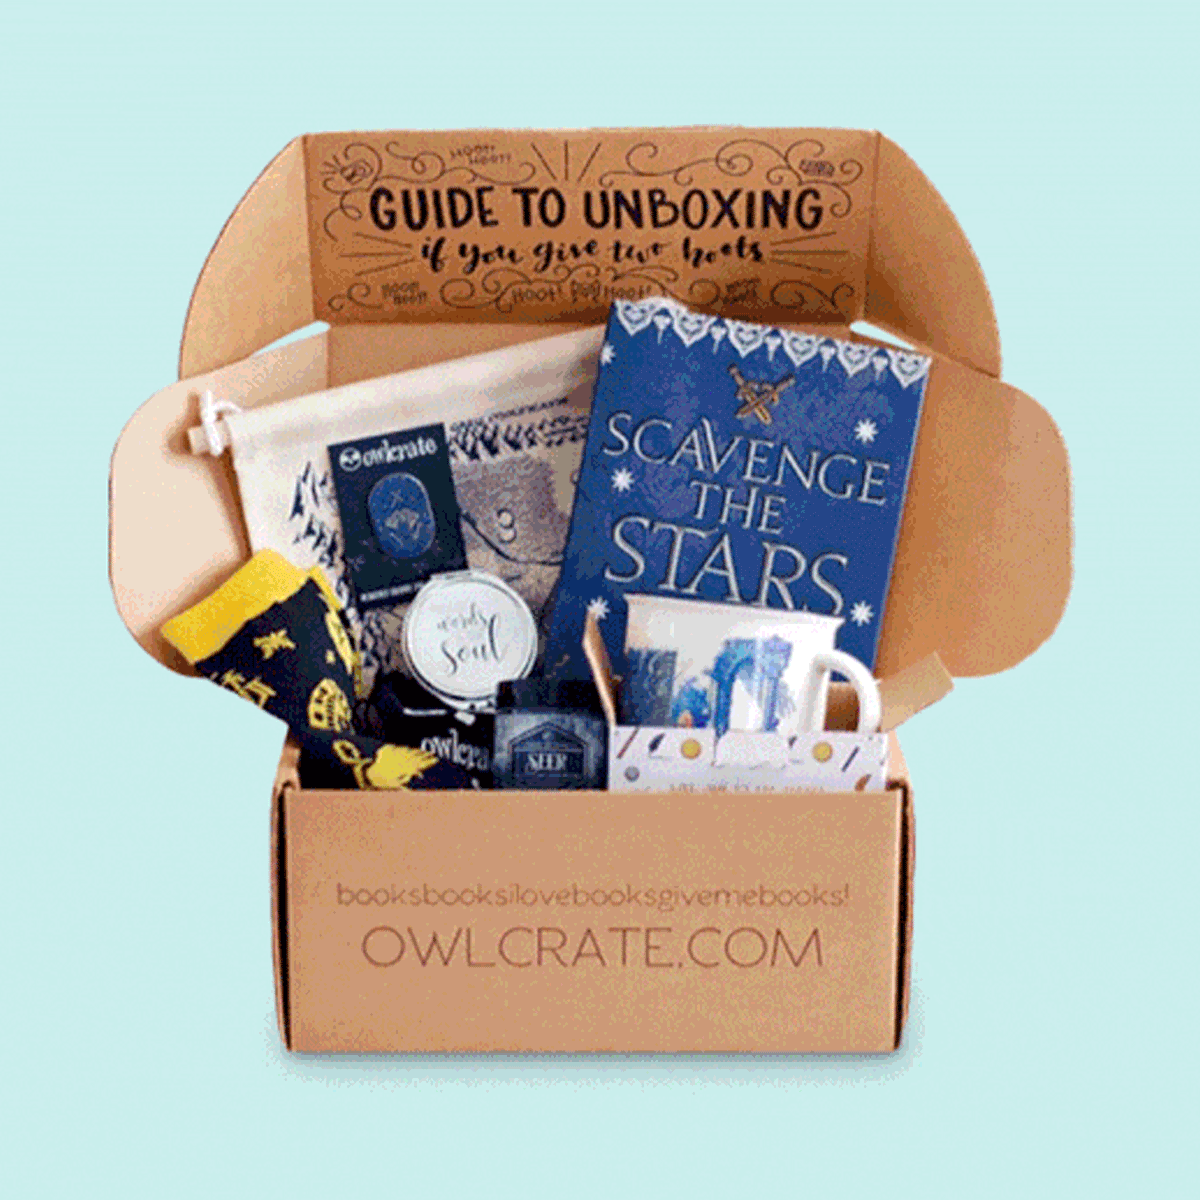 Owl Crate Book Subscription